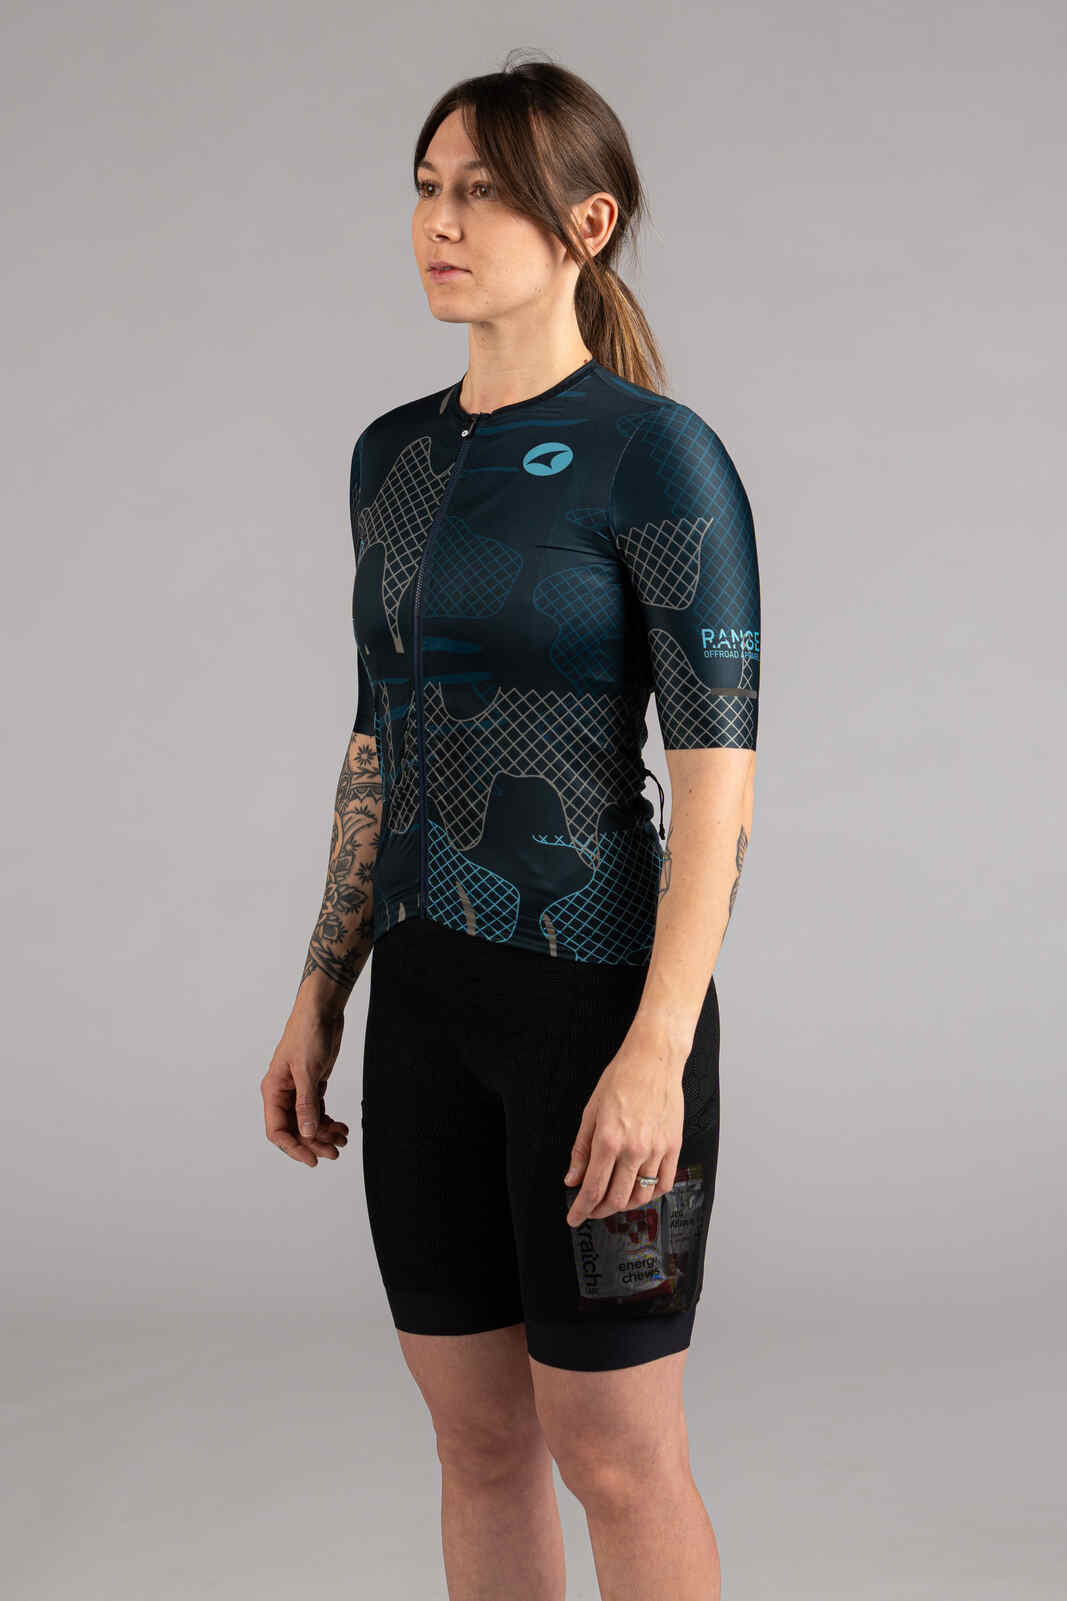 Women's Navy Blue Gravel Cycling Jersey - Front View